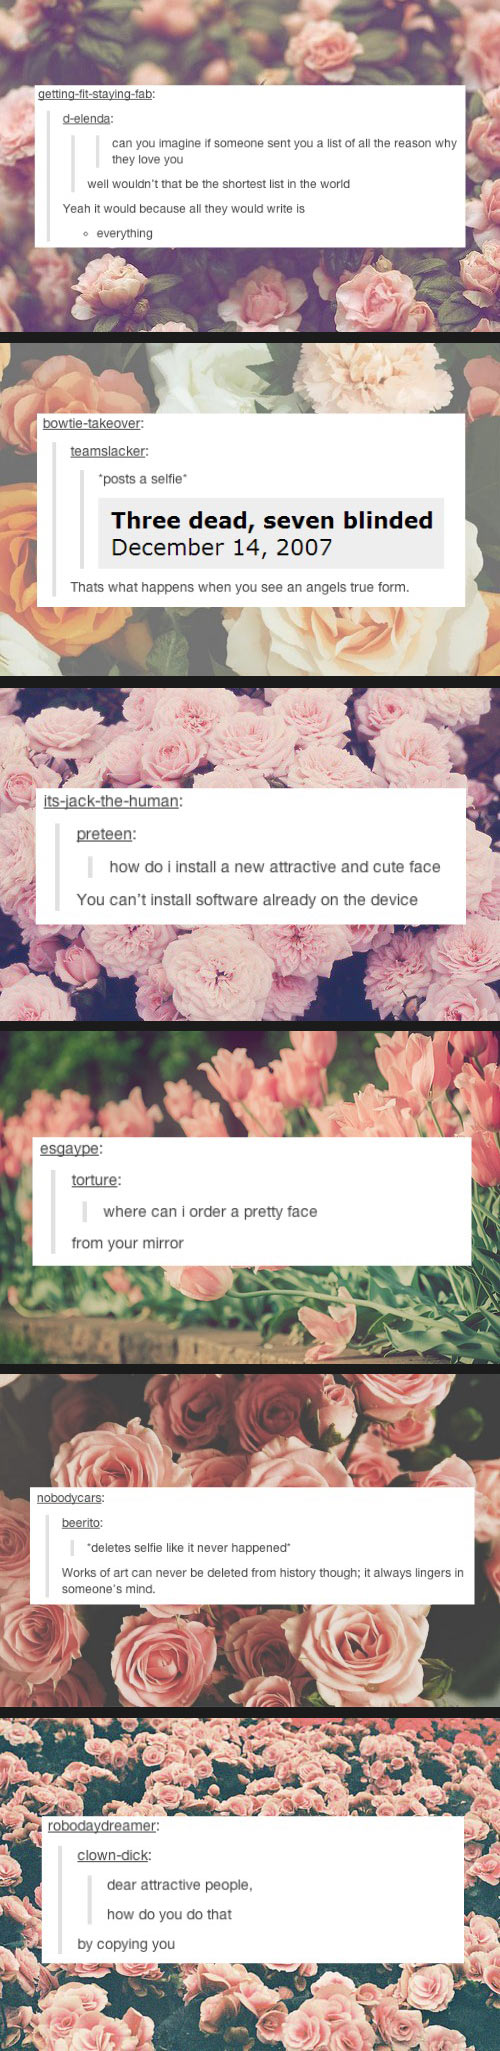 cool-tumblr-quotes-sayings-flowers